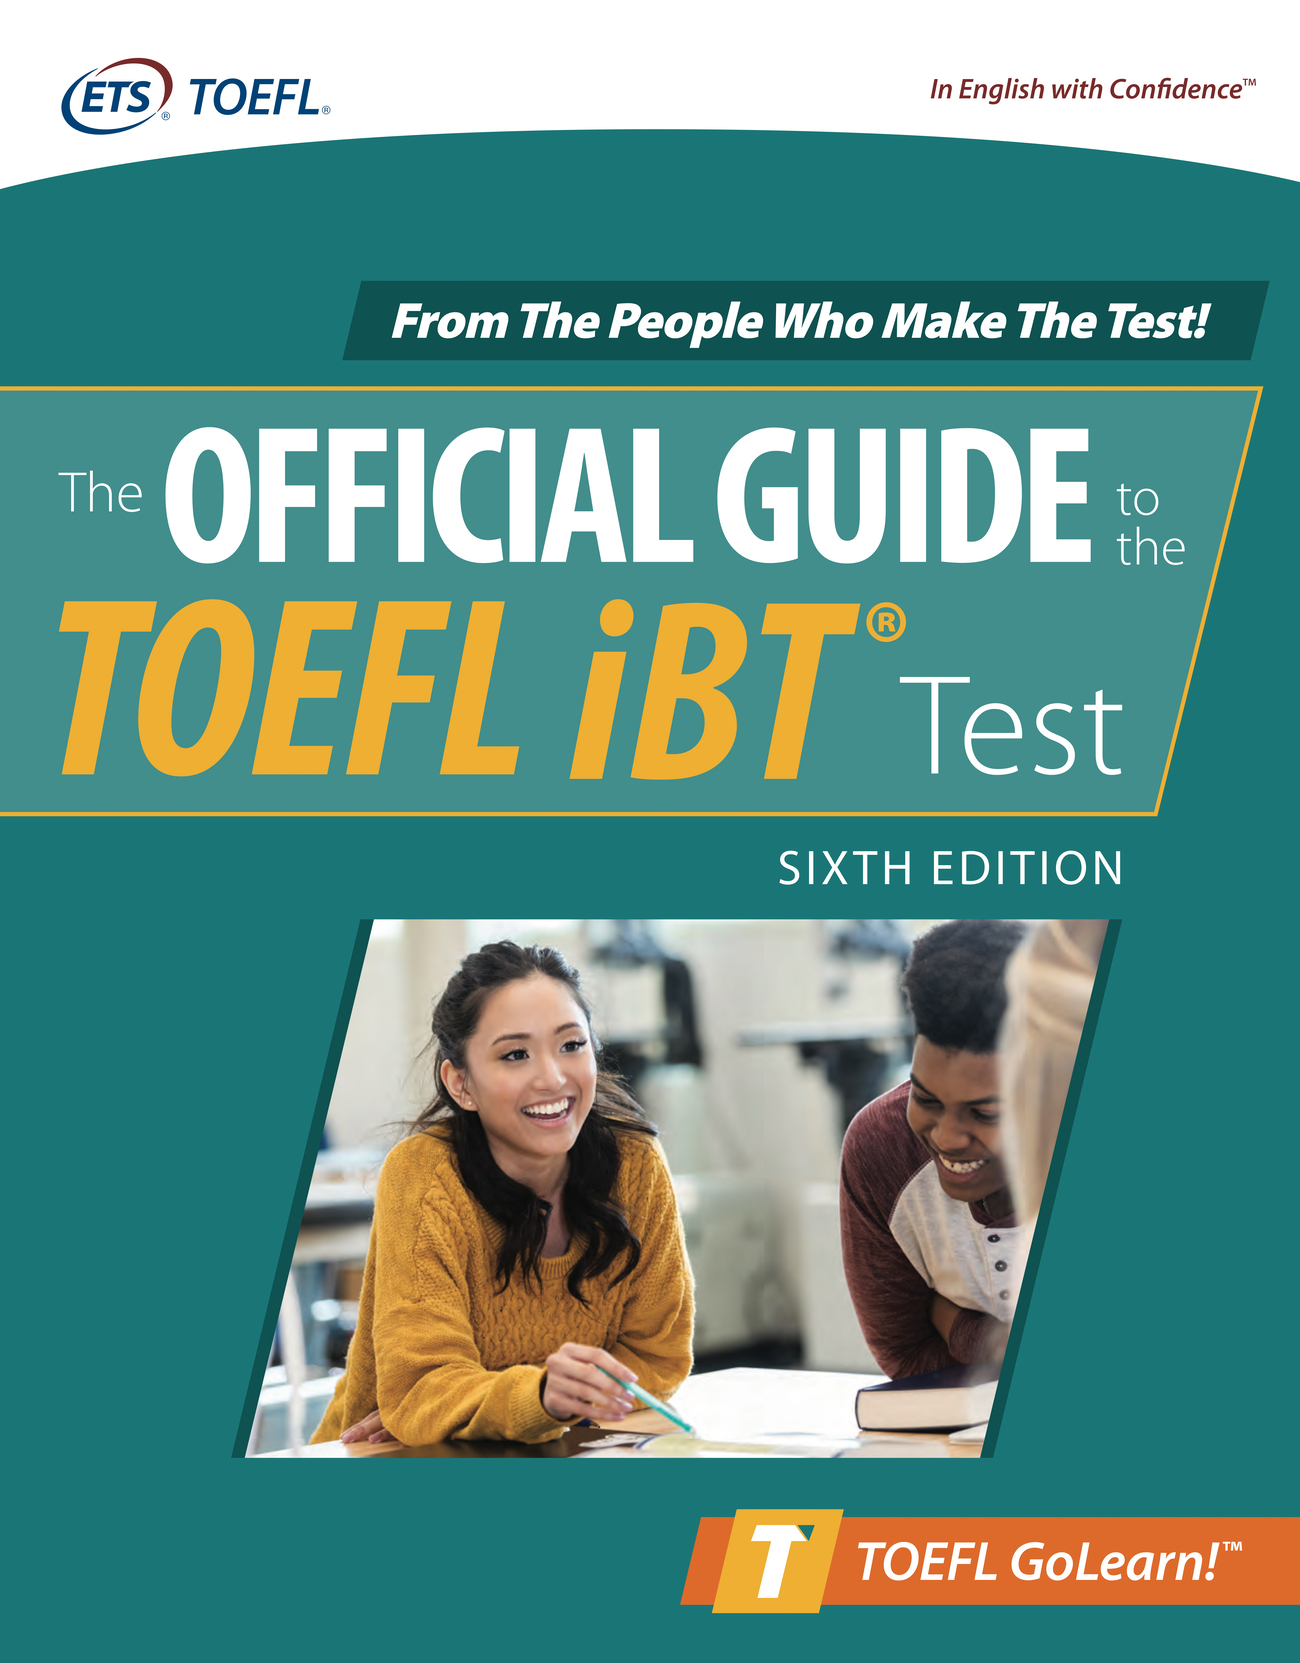 Official TOEFL iBT Tests book cover